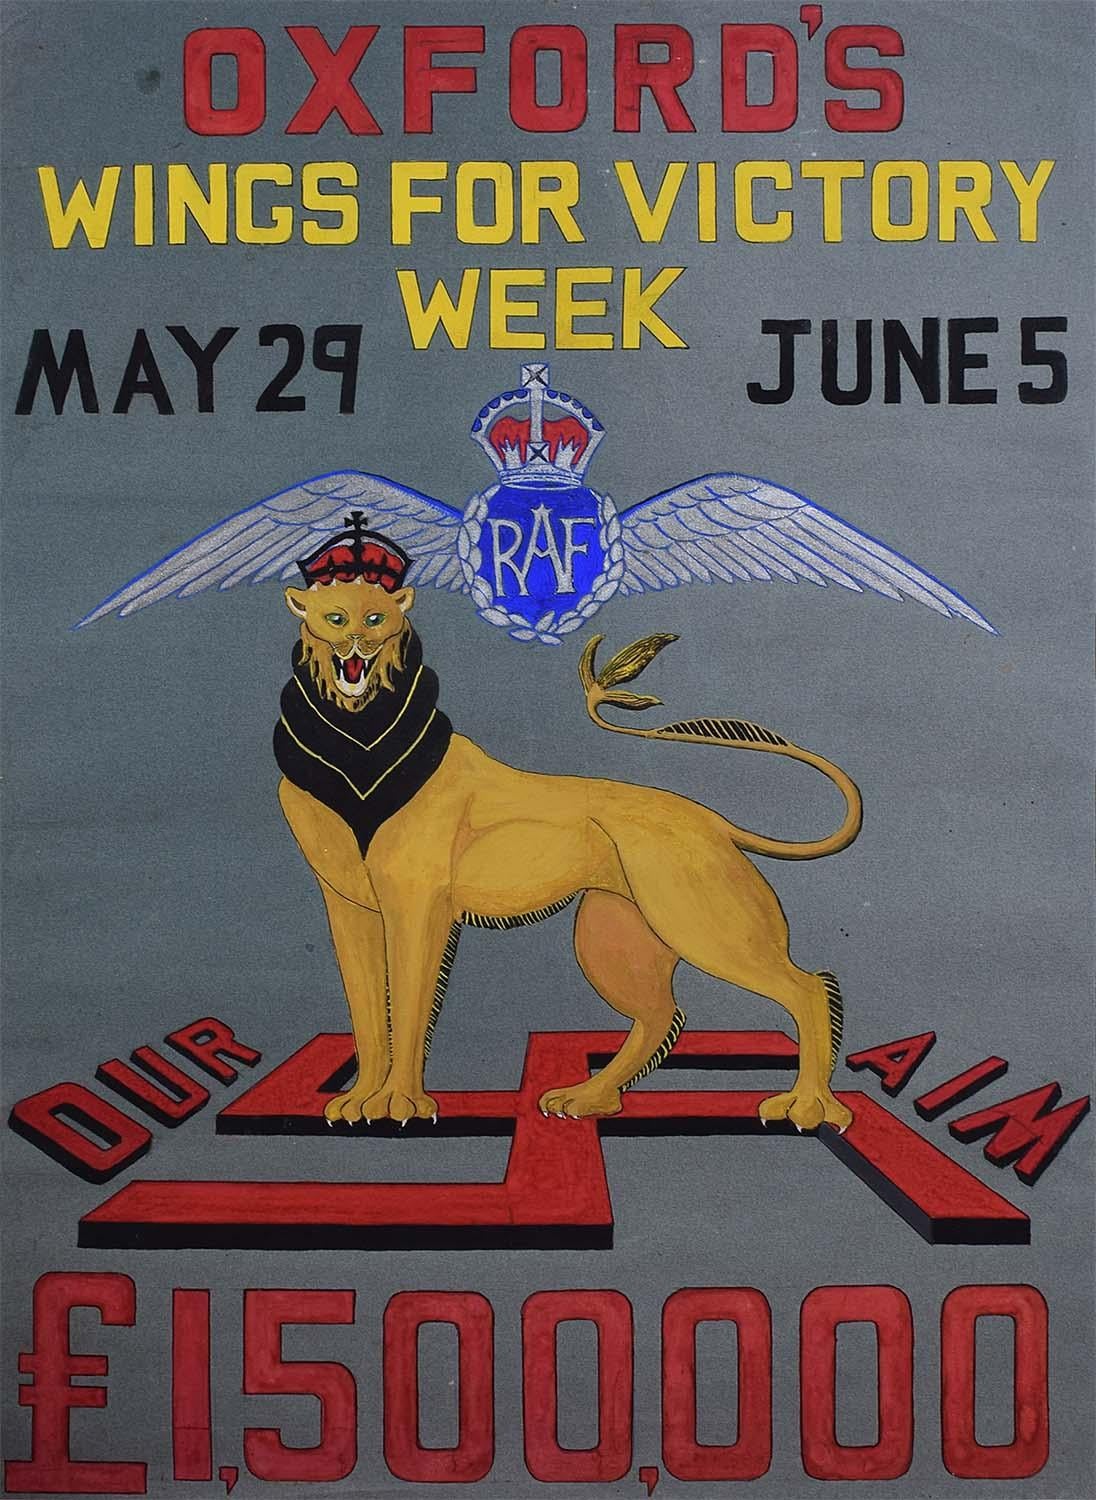 Oxford Wings for Victory Original Vintage Poster Design World War IV propaganda - Art by Unknown